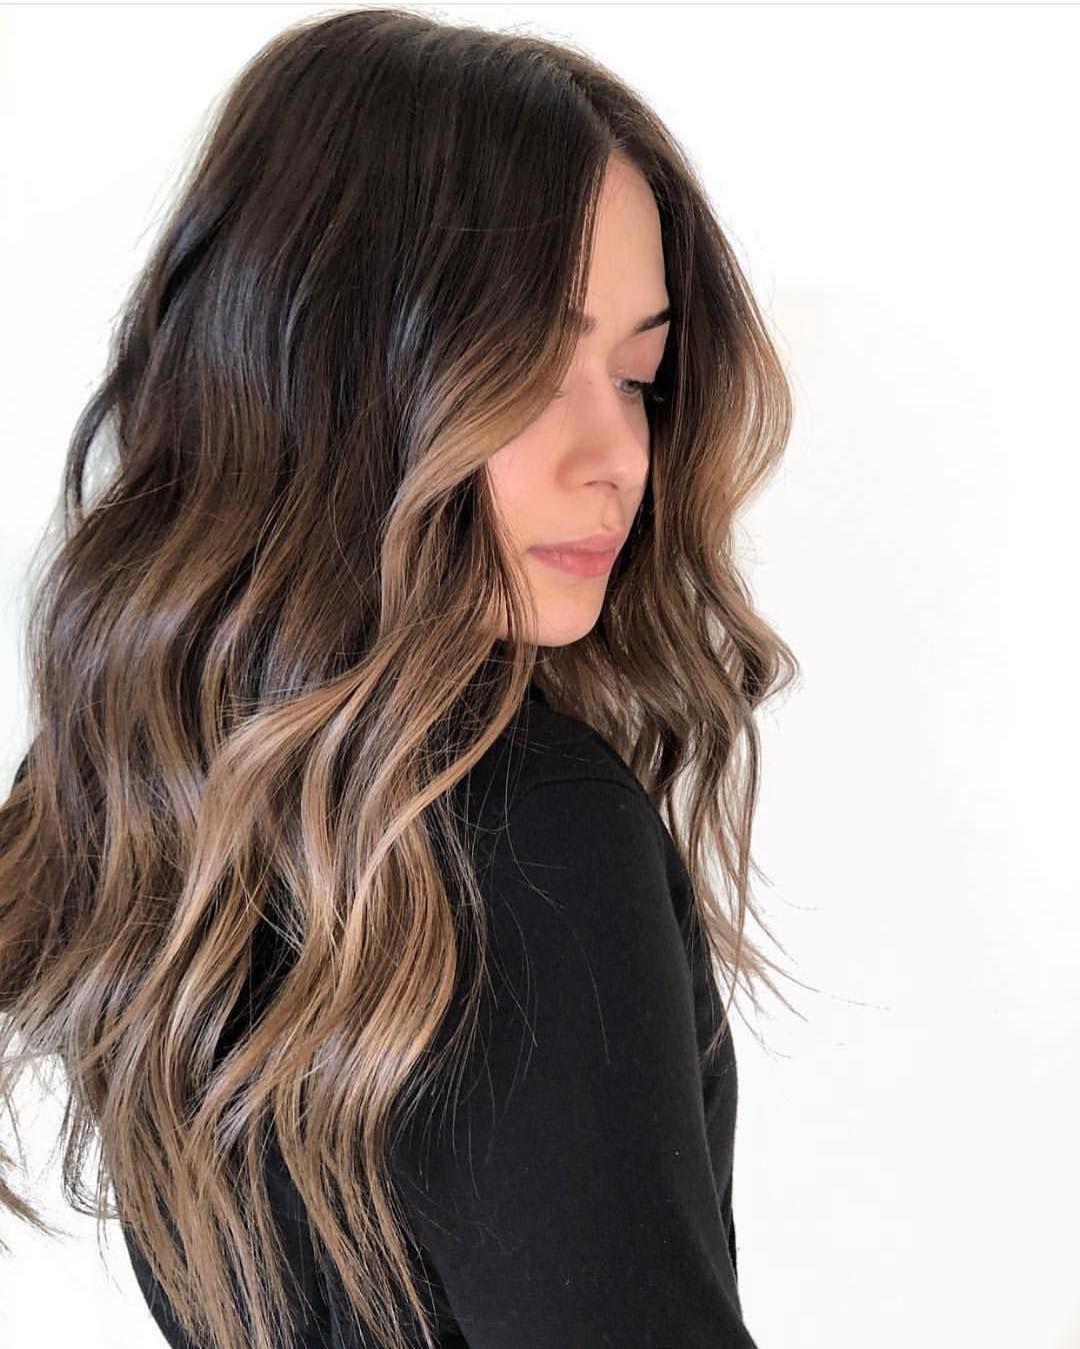 Hairstyles For Women Fall 2019 -   15 hair Inspo balayage ideas